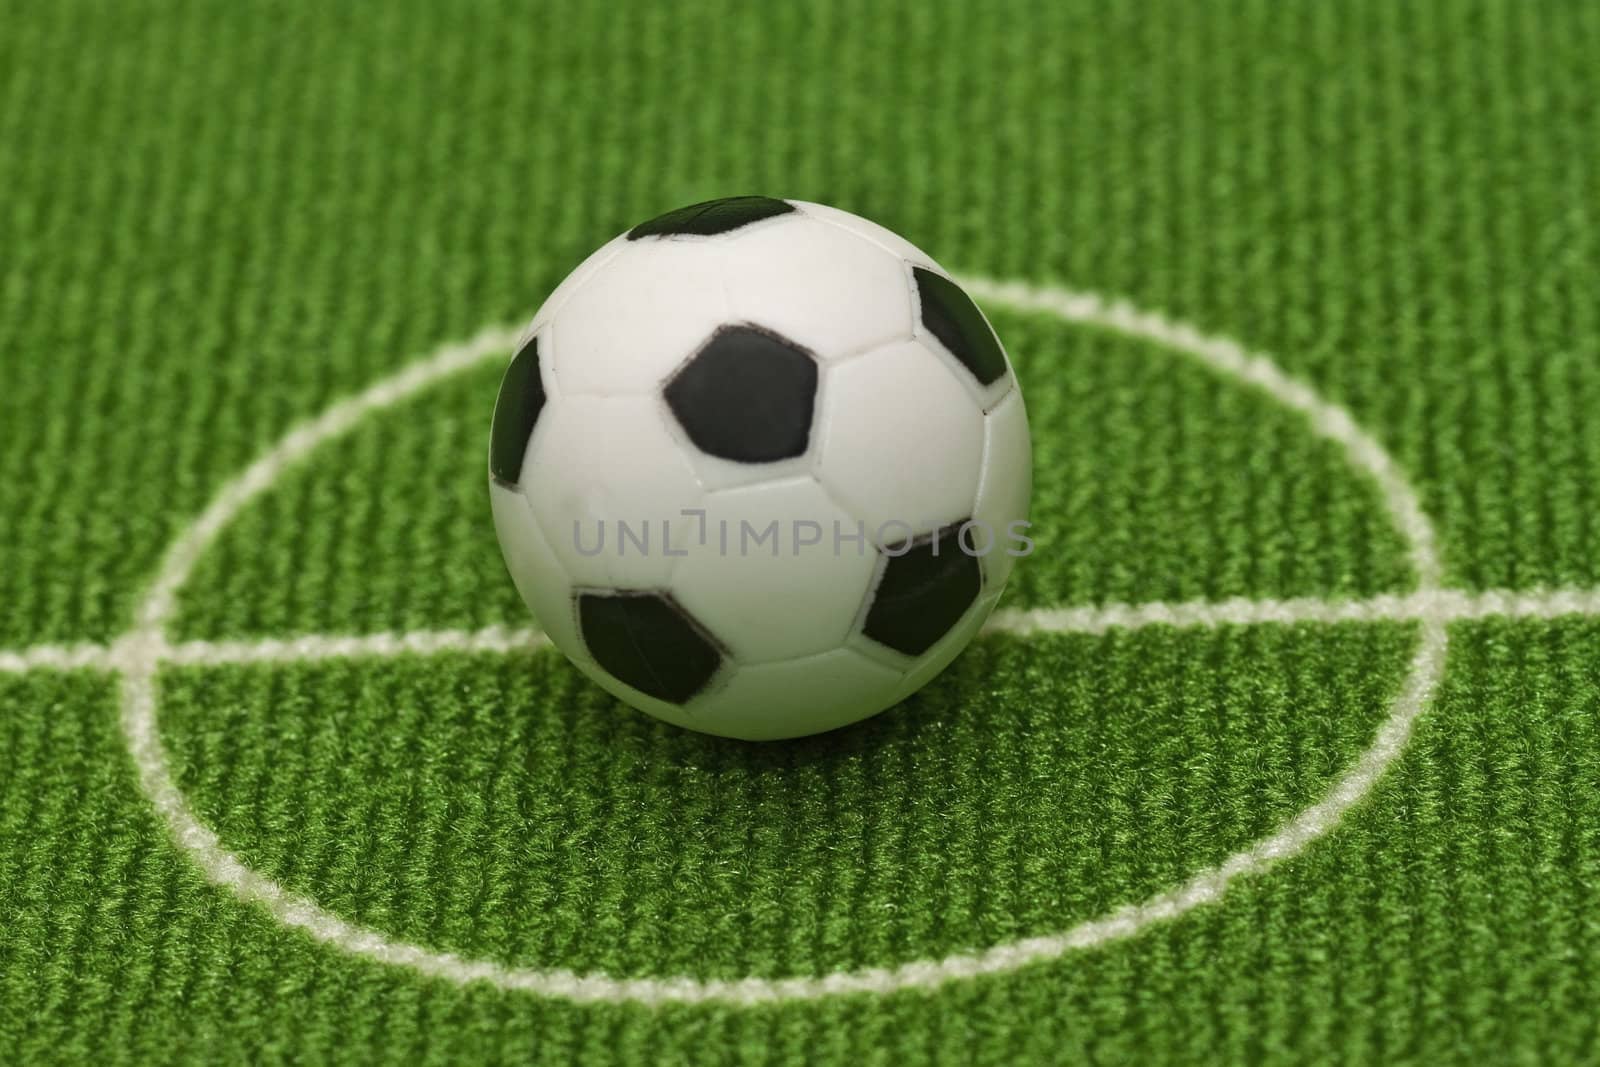 Soccer ball by Colour